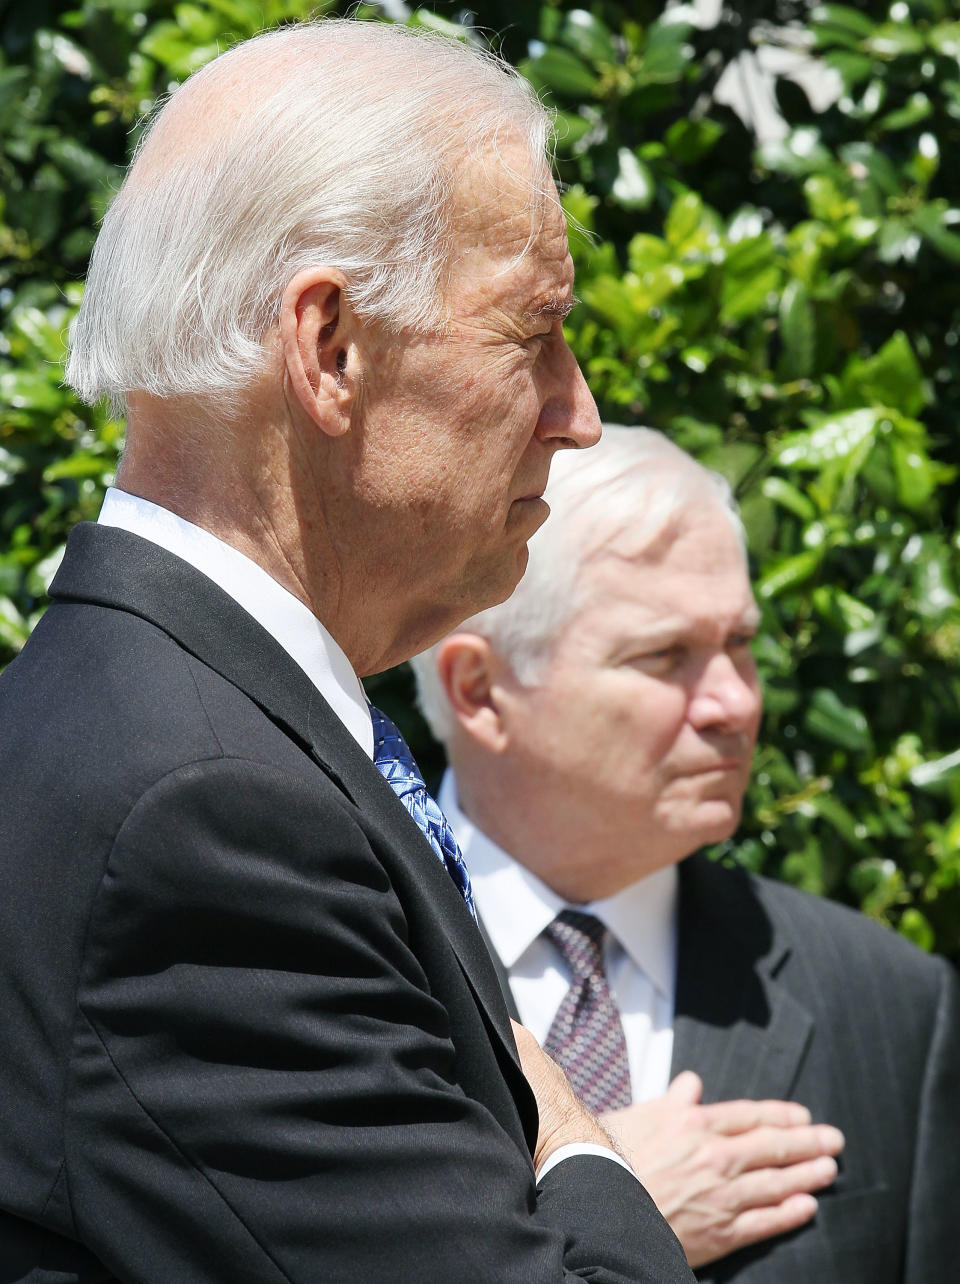 ARLINGTON, VA - MAY 05: U.S. Vice President Joseph Biden (L), and U.S. Secretary of Defense Robert Gates (R) participate in a wreath laying ceremony to honor the victims of the September 11, 2001 terrorist attack at the Pentagon, May 5, 2011 in Arlington, Virginia. Earlier this week U.S. President Barack Obama announced that Osama Bin Laden was killed during a special force led operation in a house in Abbottabad, Pakistan. (Photo by Mark Wilson/Getty Images)